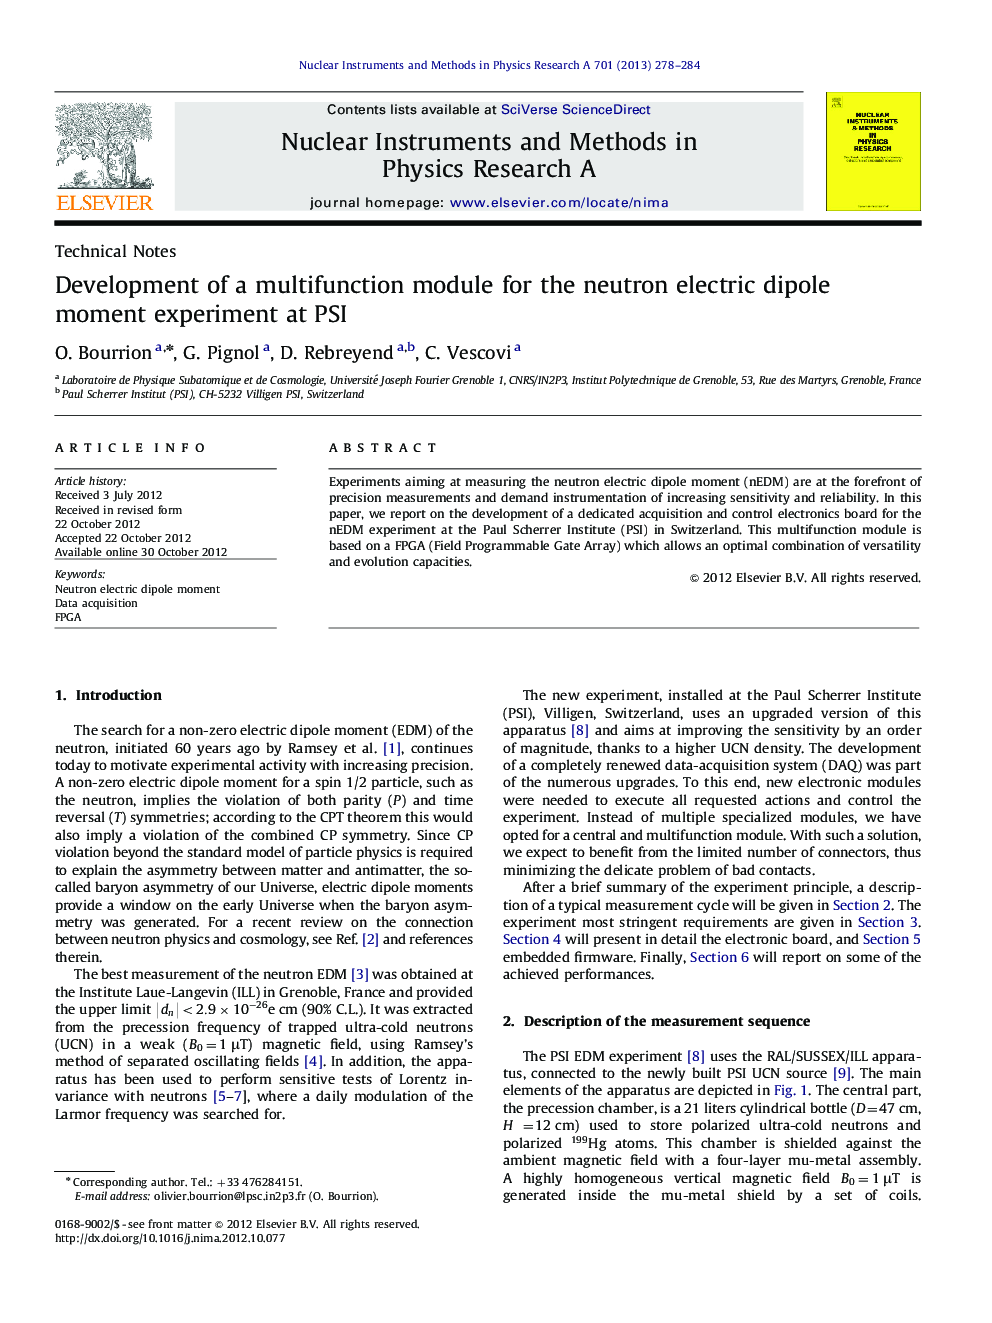 Development of a multifunction module for the neutron electric dipole moment experiment at PSI